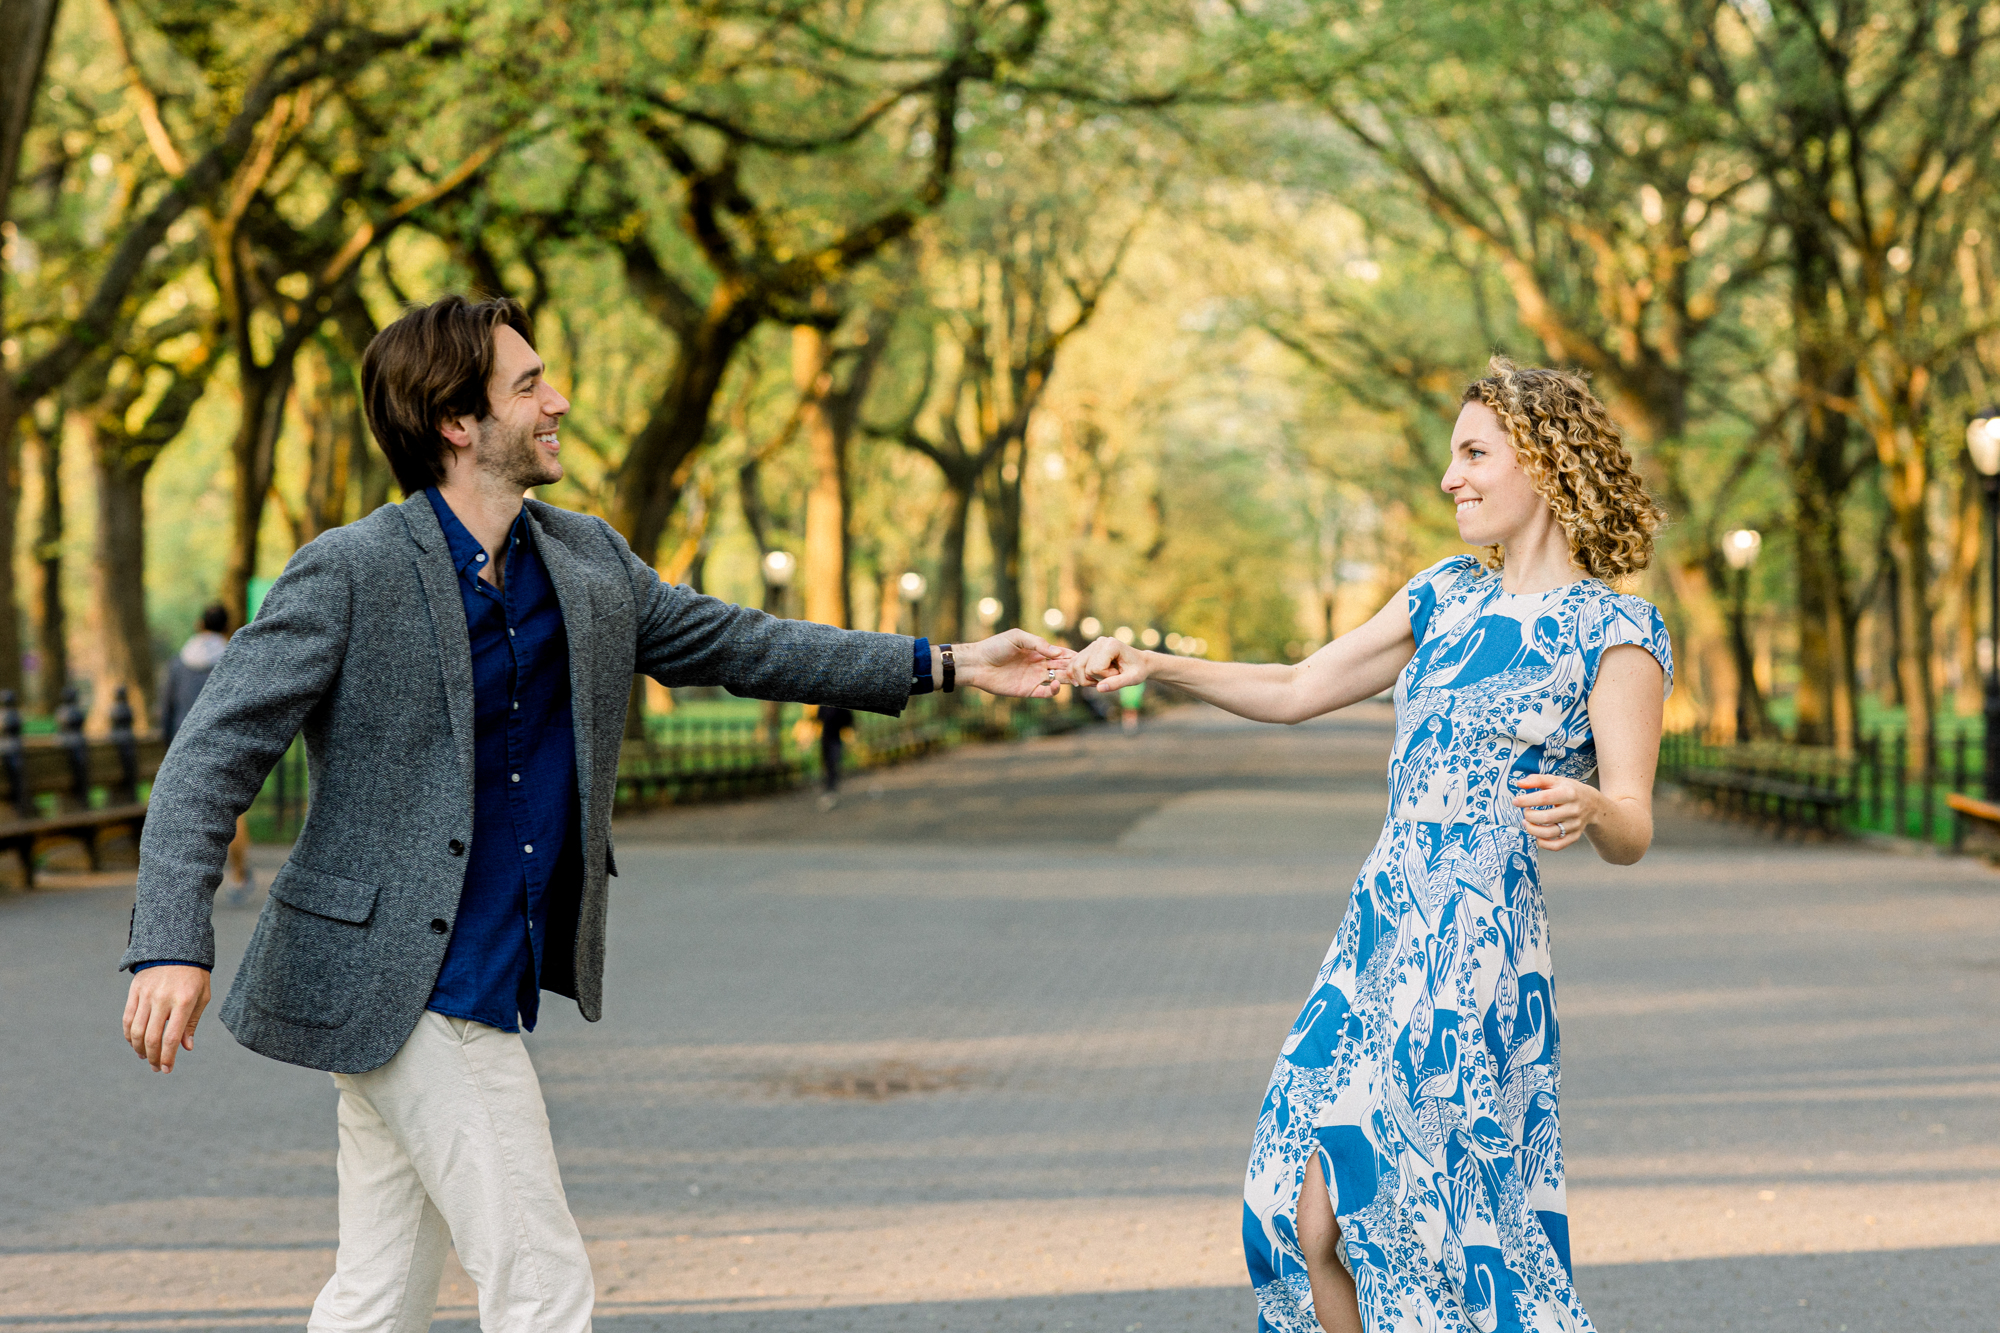 Intimate New York engagement photography